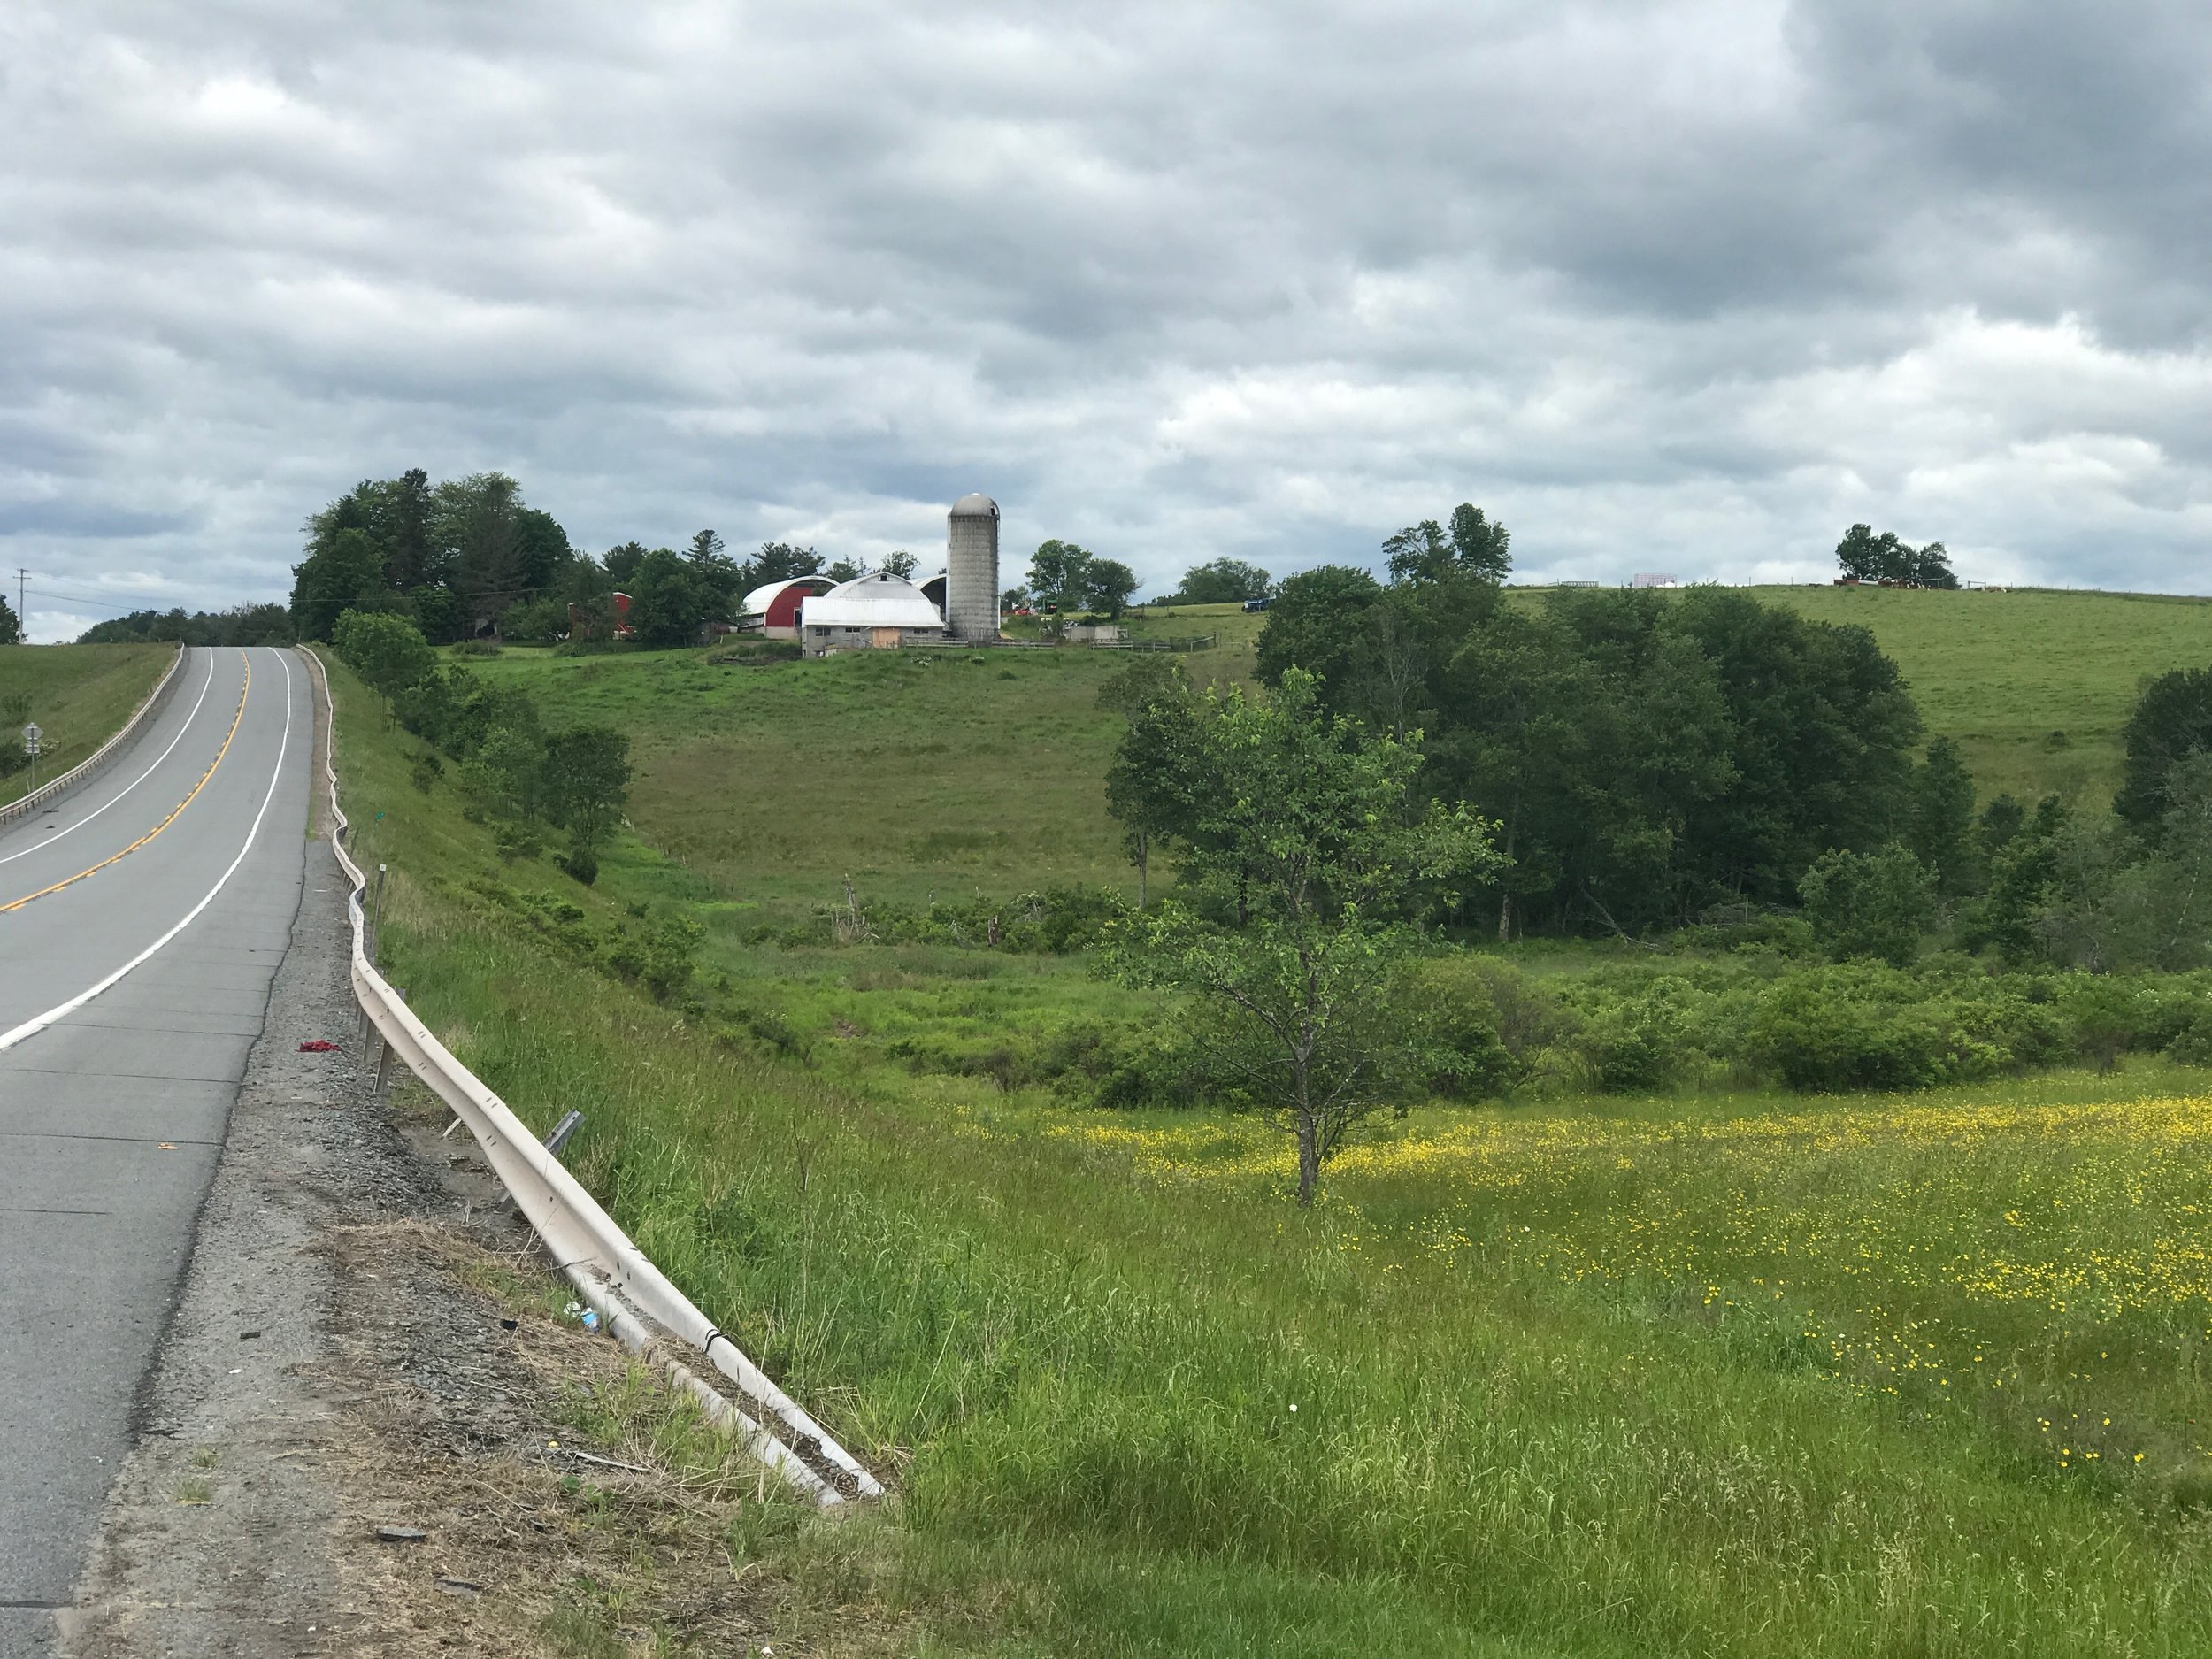  The pastures around the site of the 1969 Woodstock music festival are more quiet these days. 